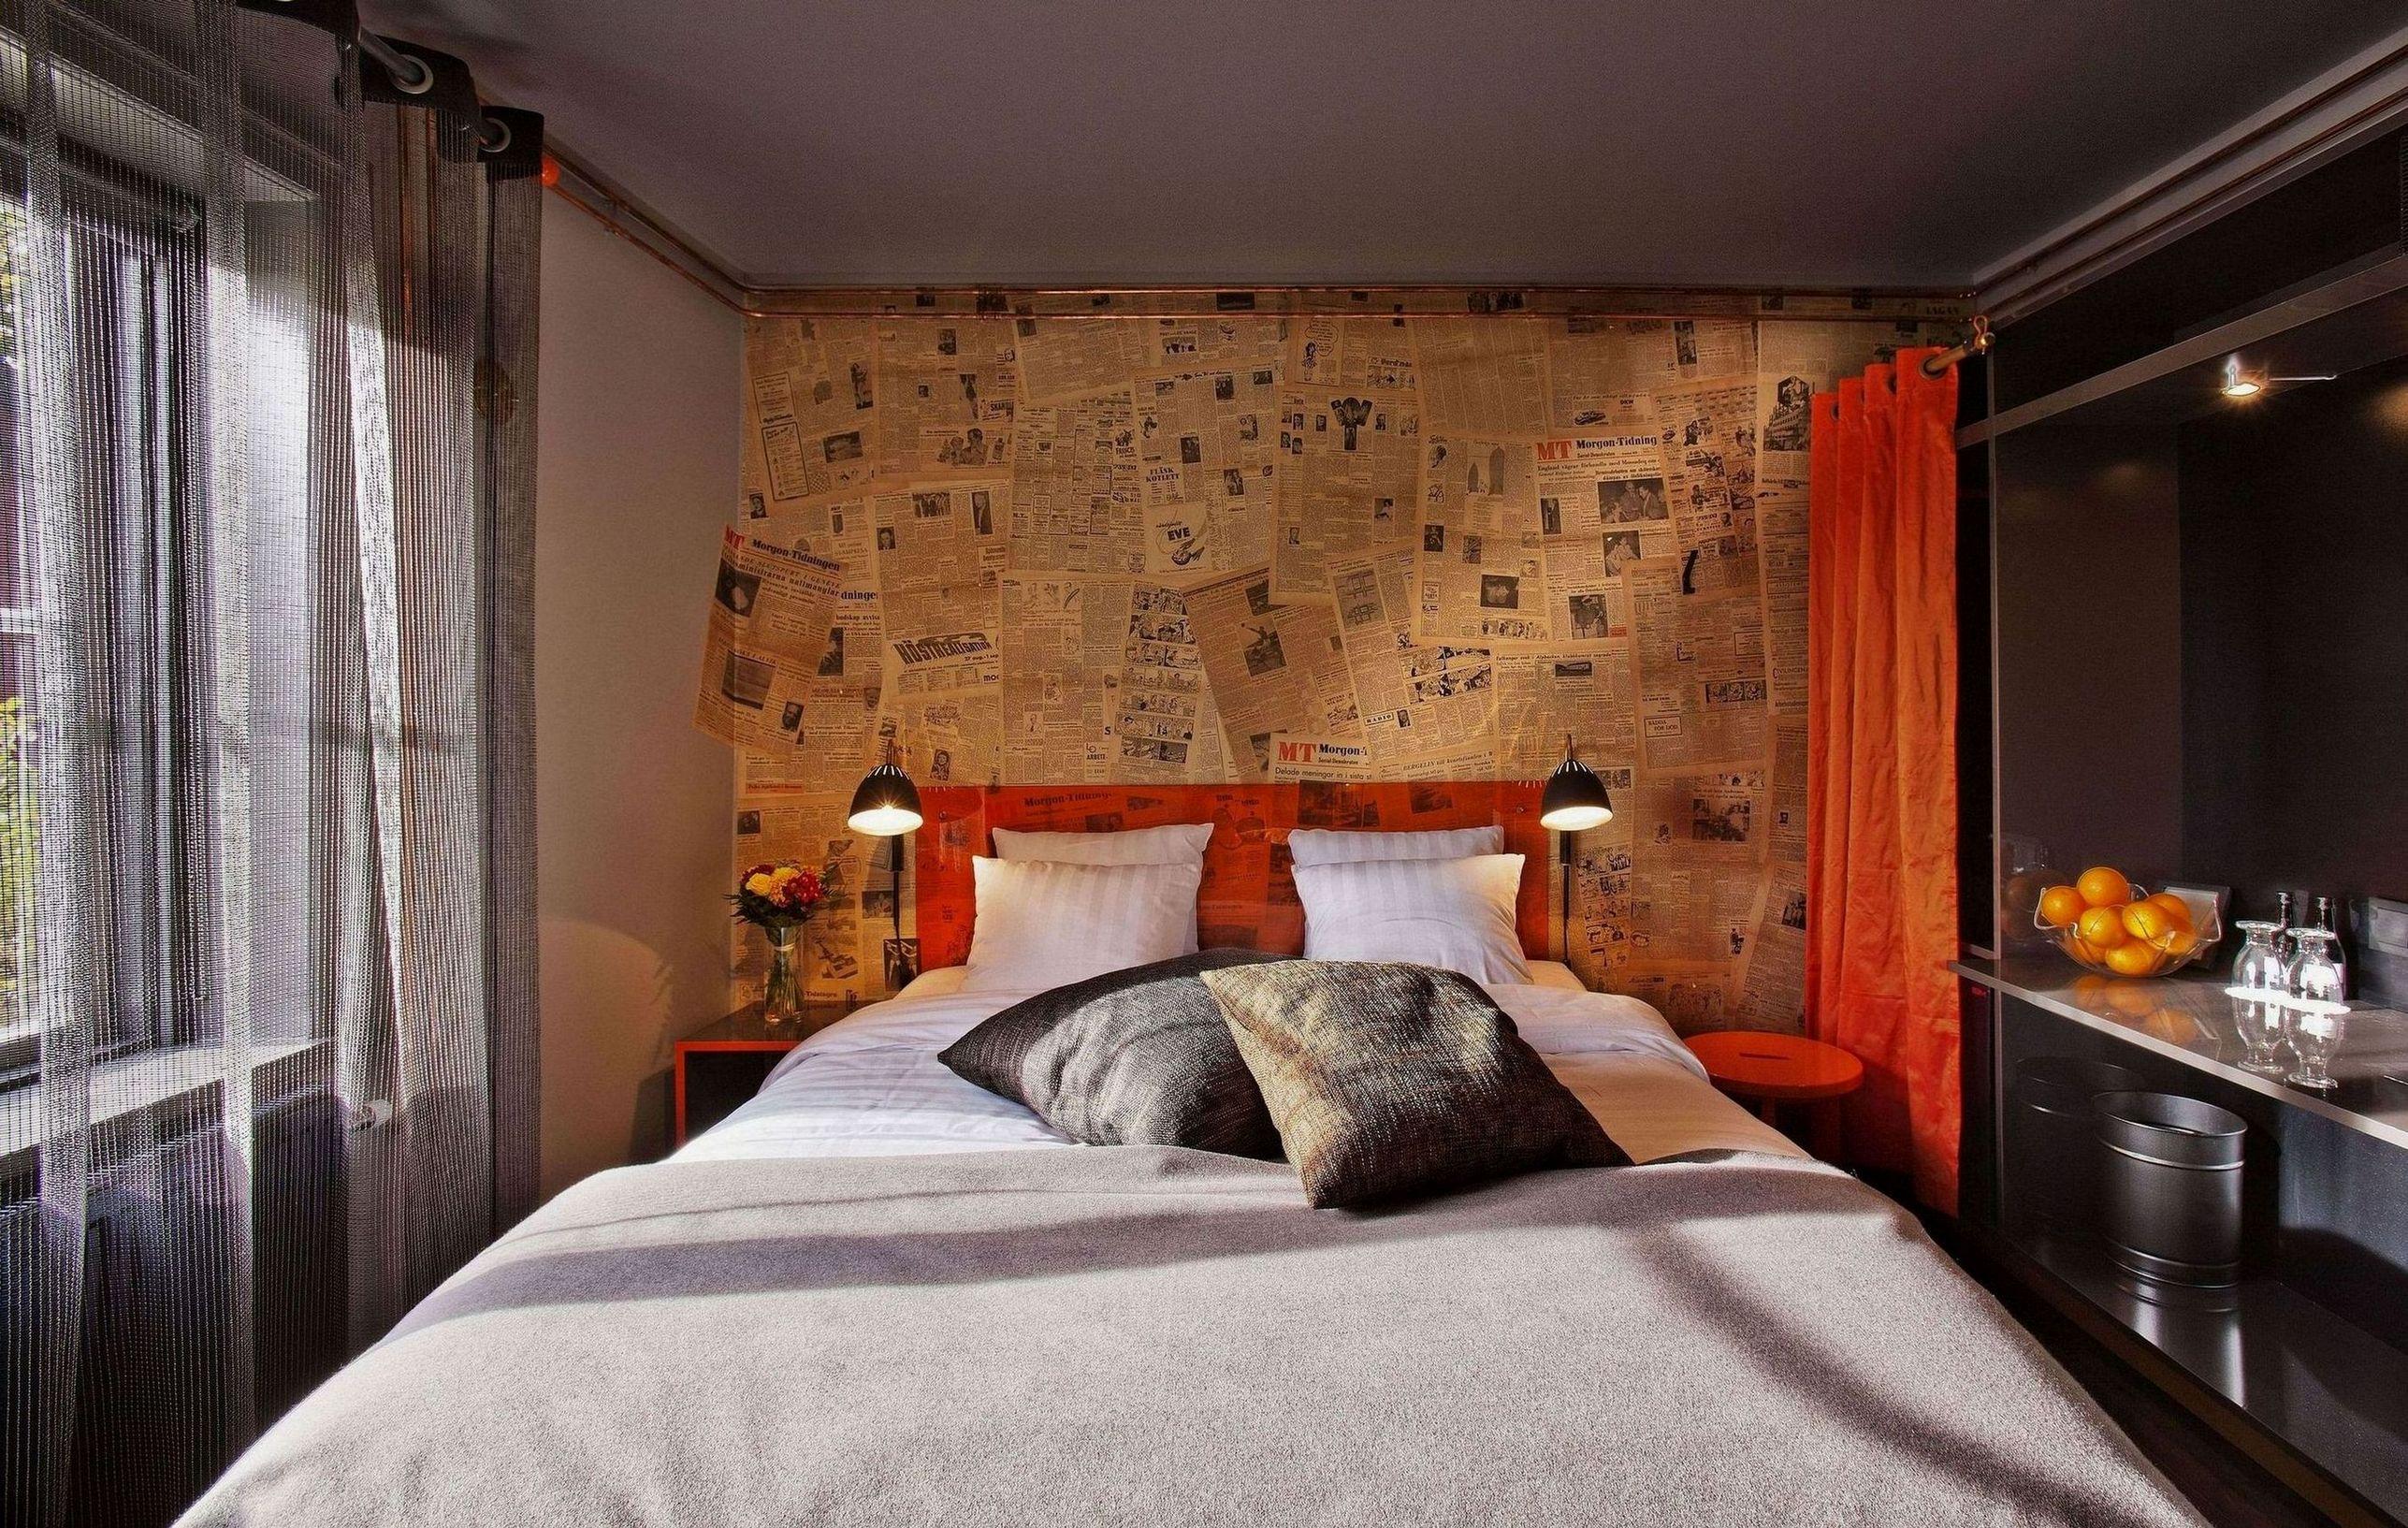 The standard queen rooms are situated in the building called Trubaduren, which is situated a stone s throw from the castle, and the rooms are named after Swedish artists like Eva Dahlgren and Ulf Lundell. The rooms have a modern, cool yet cosy design. The bed is either 160 cm or a round bed 190 cm across. Bath with shower, minibar, nonsmoking, TV and hairdryer. Breakfast, WiFi and parking is included.